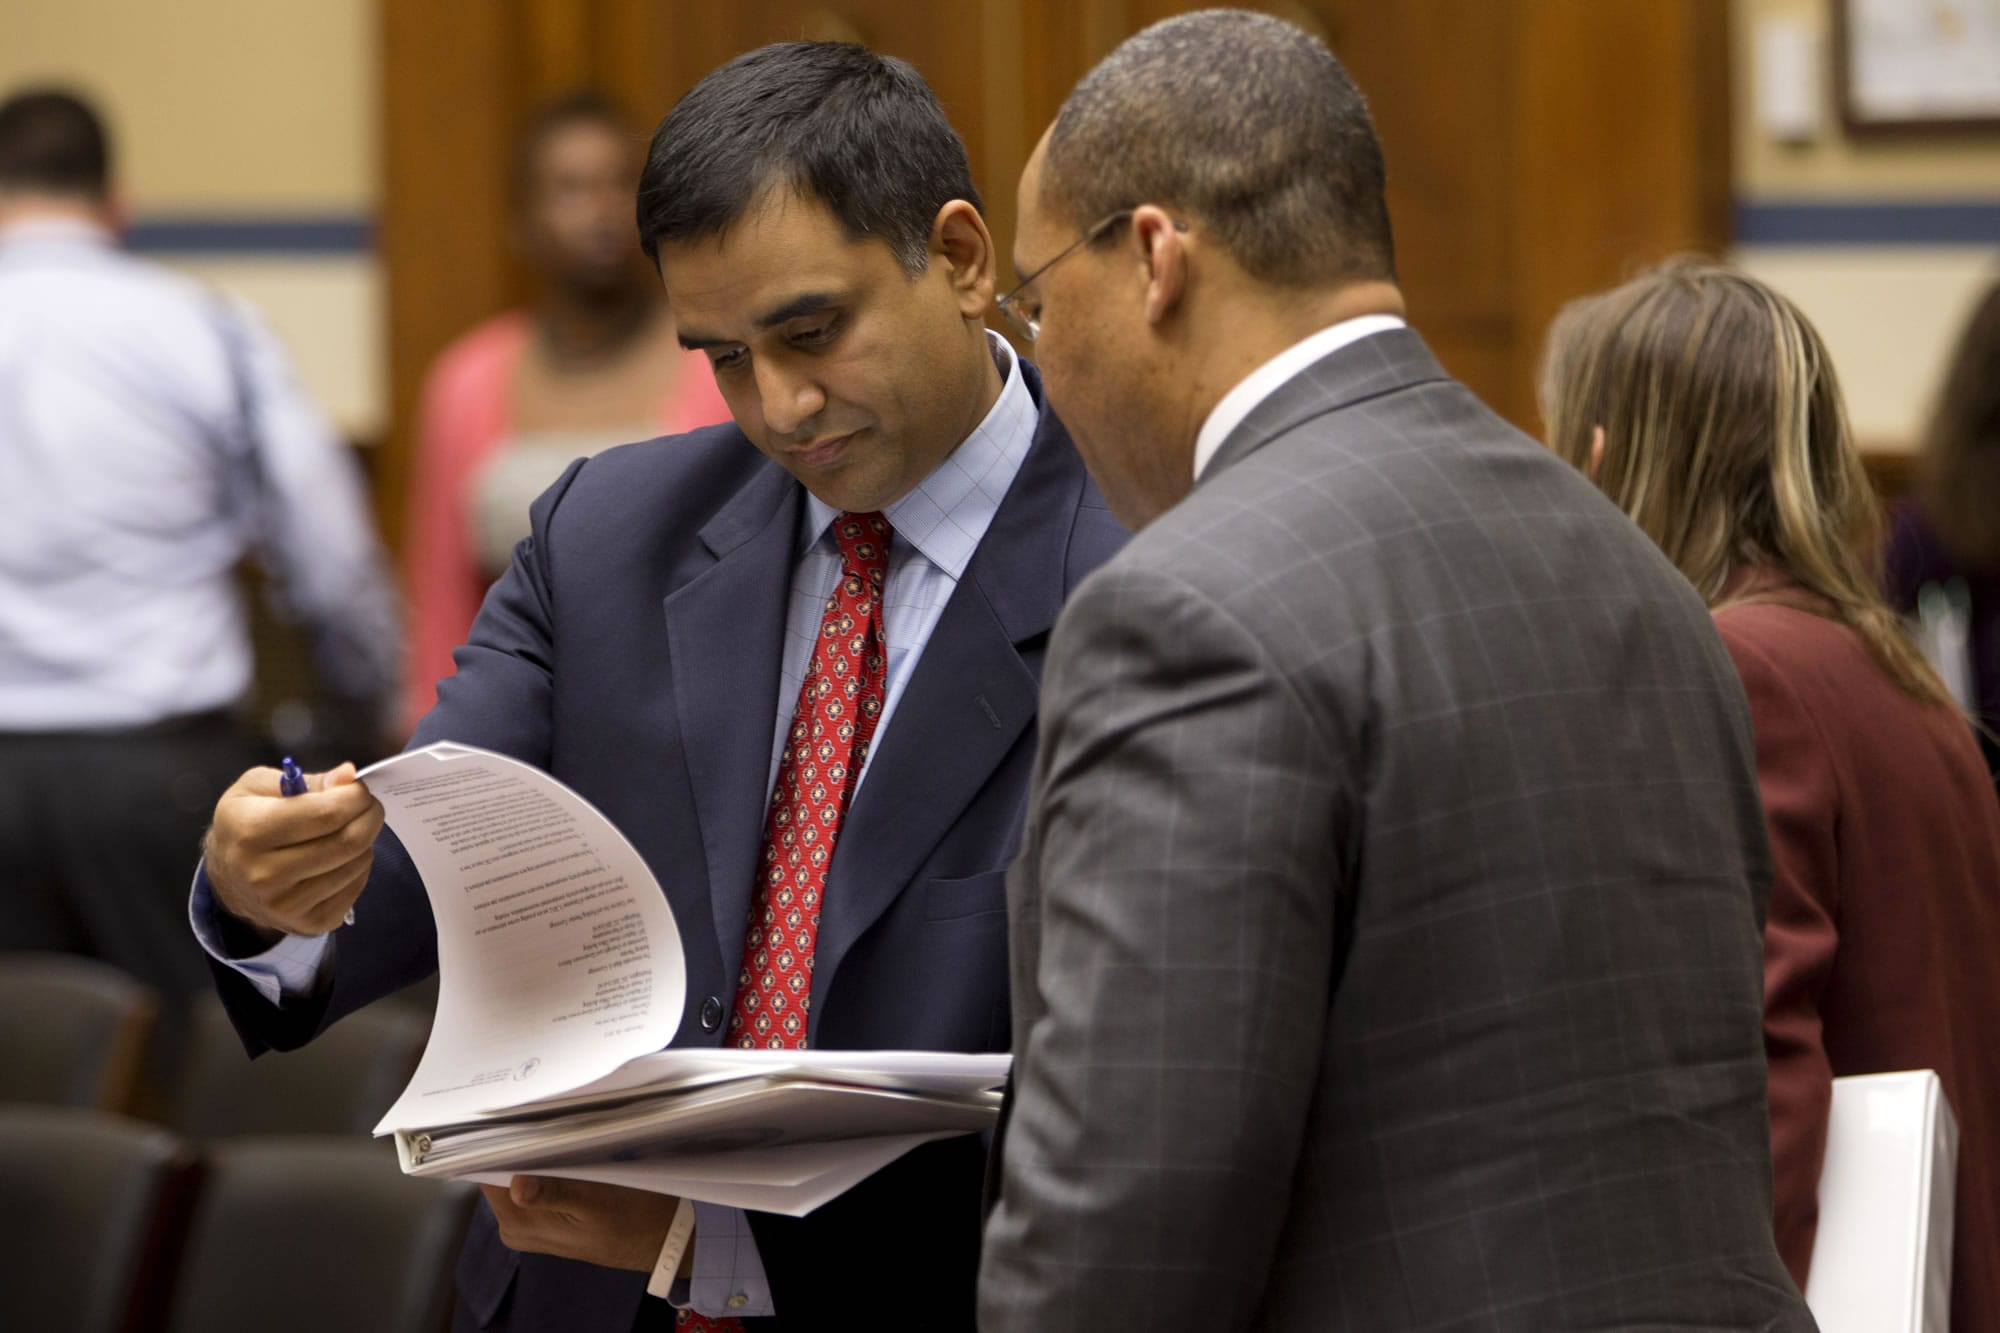 Deputy Commerce Secretary for Resource Management Hari Sastry, left, looks over documents on Capitol Hill in Washington on Tuesday during a break in his testimony in a joint hearing on sequestration held by House Oversight and Government Reform Committee's subcommittee on Economic Growth, Job Creation and Regulatory Affairs, and the subcommittee on Federal Workforce, U.S.